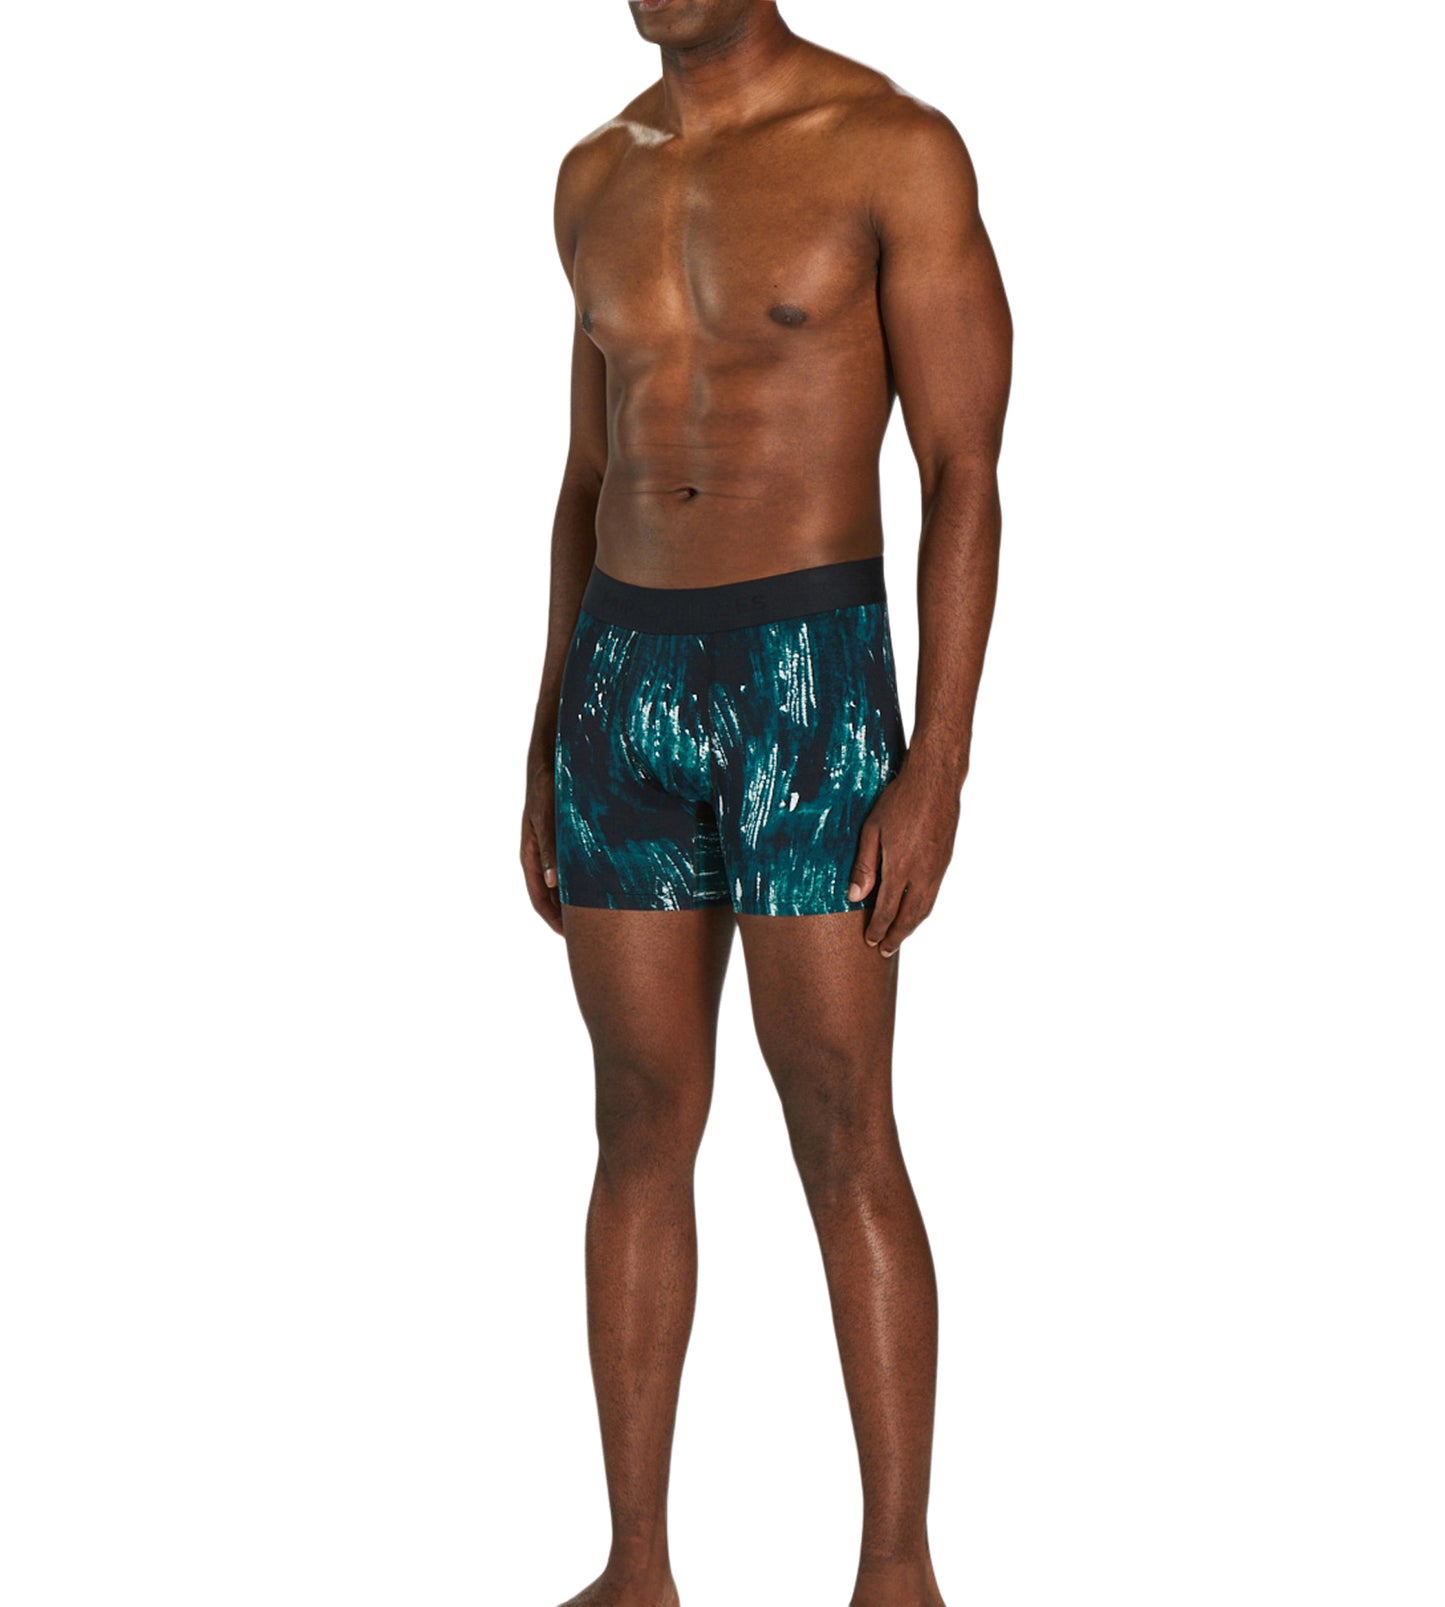 Hustle Boxer Brief 2 Pack colors consists of Sienna, Black, Dark olive green, Sienna, Silver, Lights late gray, Teal, Dark slate gray, Saddle brown